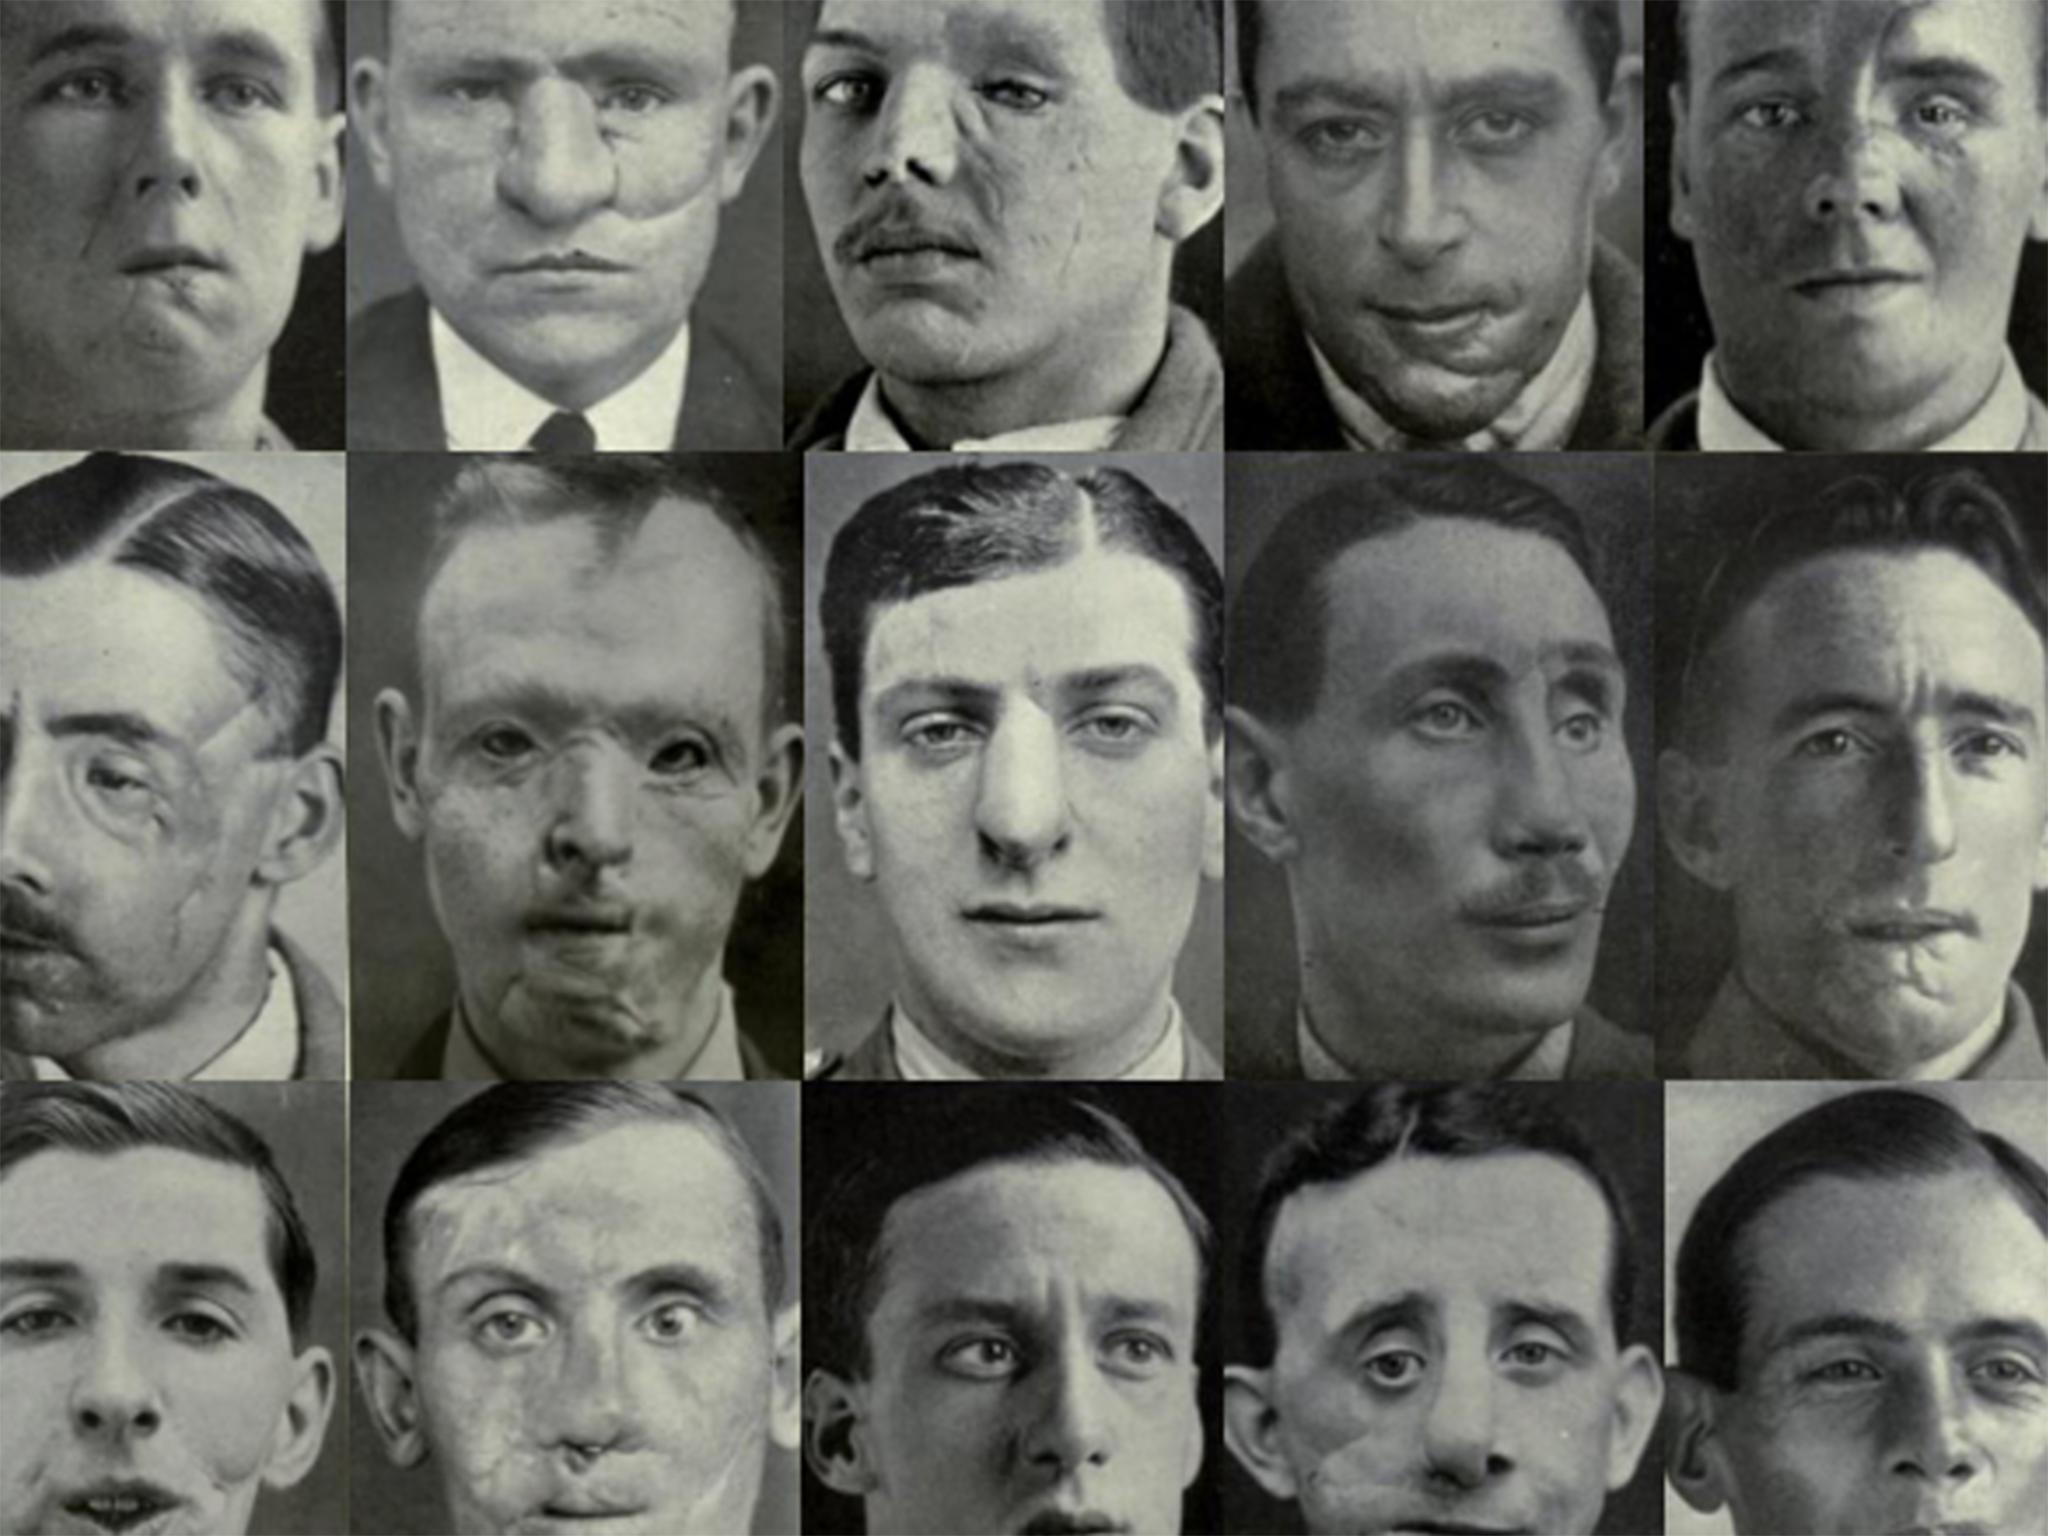 Images from ‘Plastic Surgery of the Face’ by Sir Harold Gillies, 1920